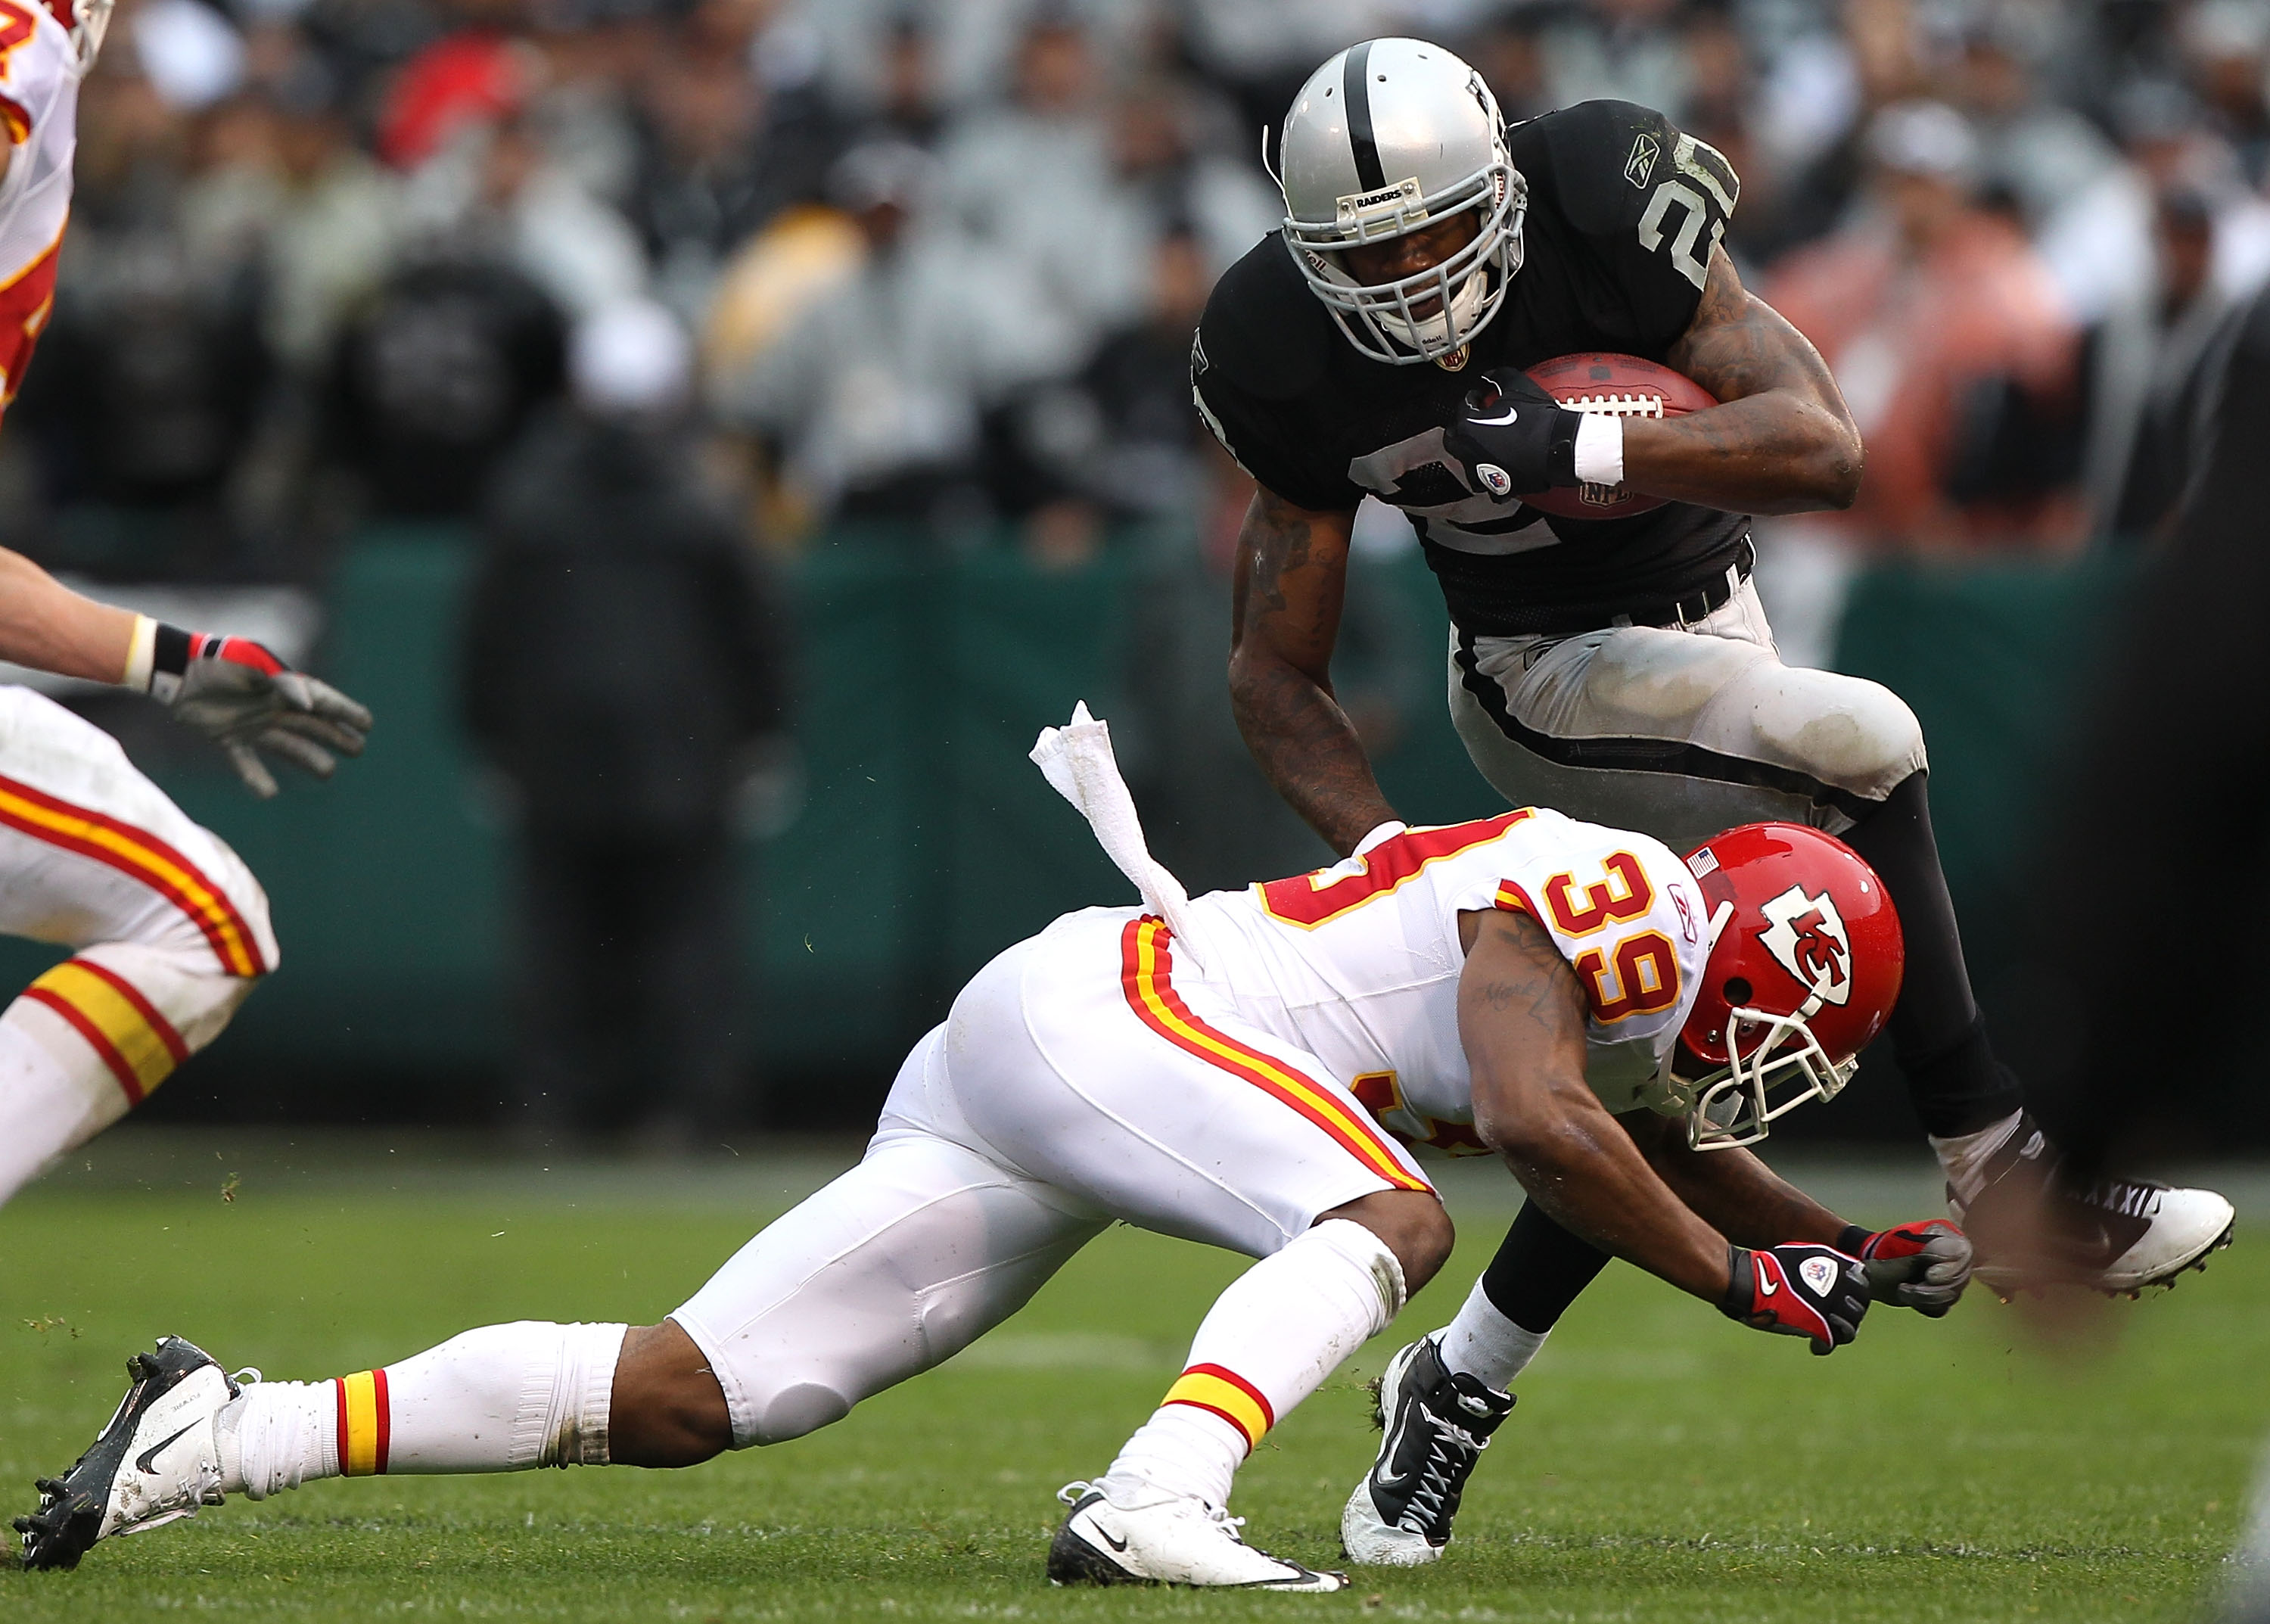 OAKLAND, CA - NOVEMBER 07:  Darren McFadden #20 of the Oakland Raiders is tackled by Brandon Carr #39 of the Kansas City Chiefs during an NFL game at Oakland-Alameda County Coliseum on November 7, 2010 in Oakland, California.  (Photo by Jed Jacobsohn/Gett